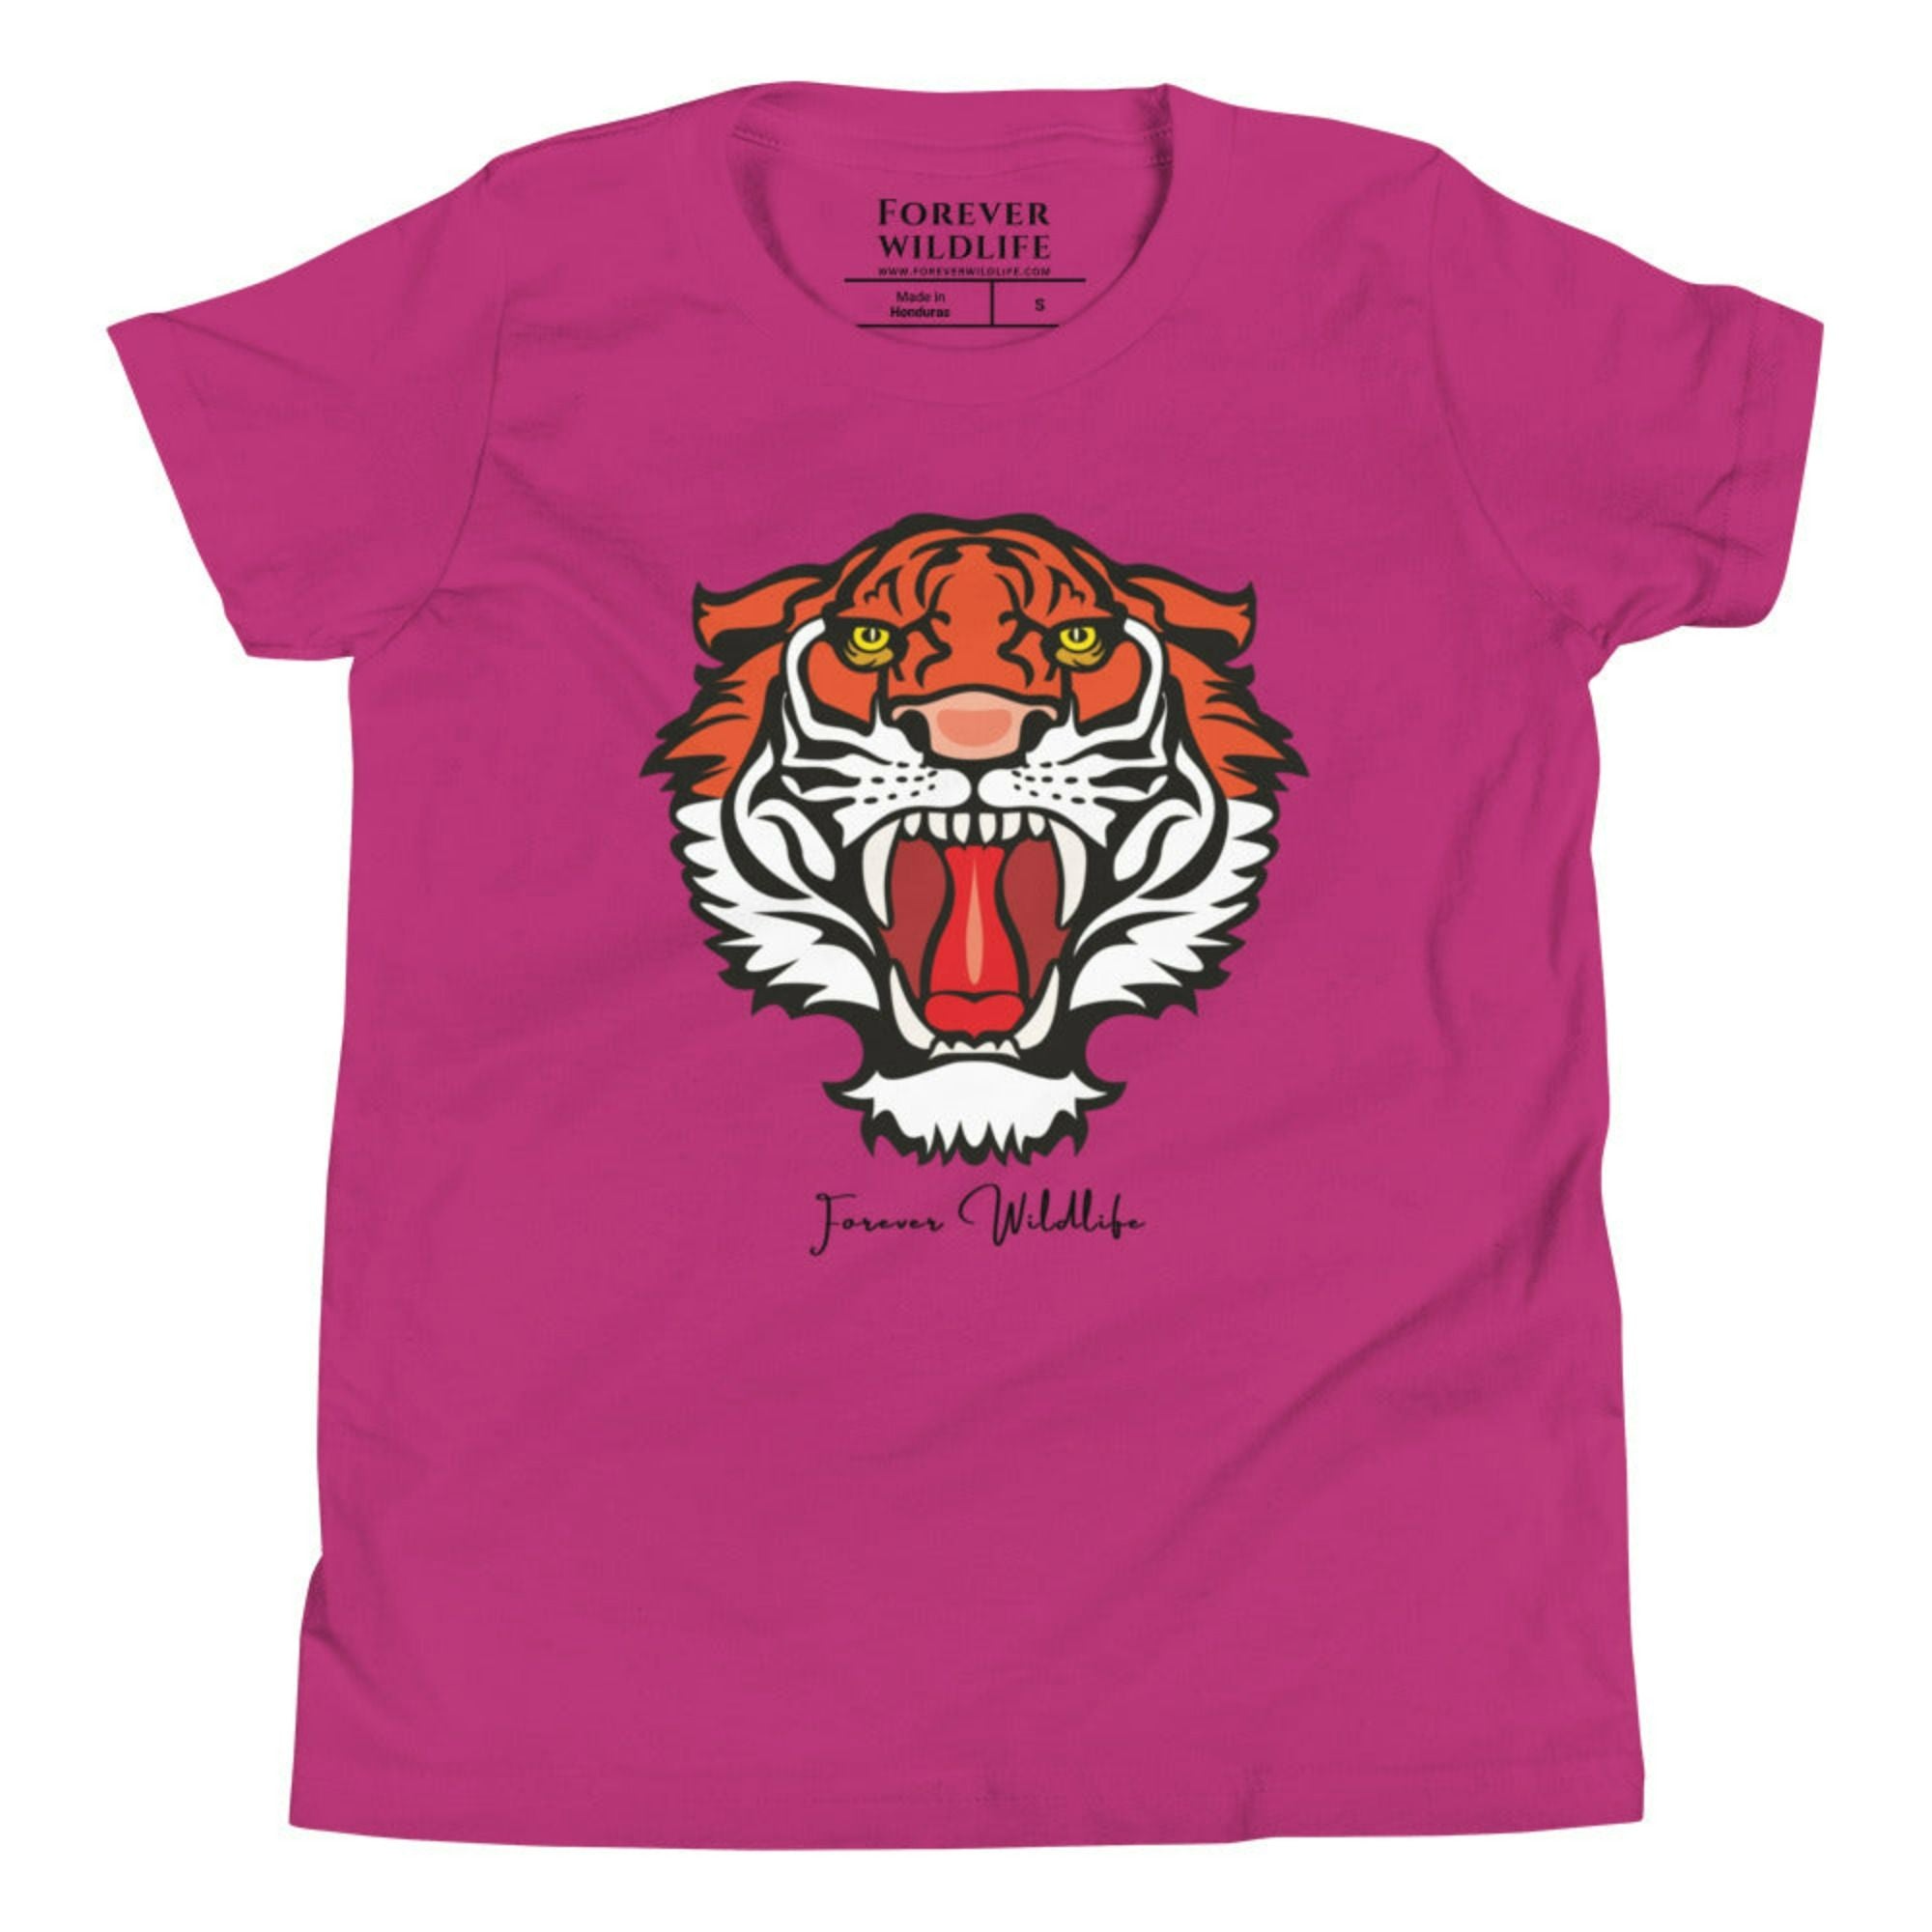 Purple Pink Youth T-Shirt with Tiger graphic as part of Wildlife T Shirts, Wildlife Clothing & Apparel by Forever Wildlife